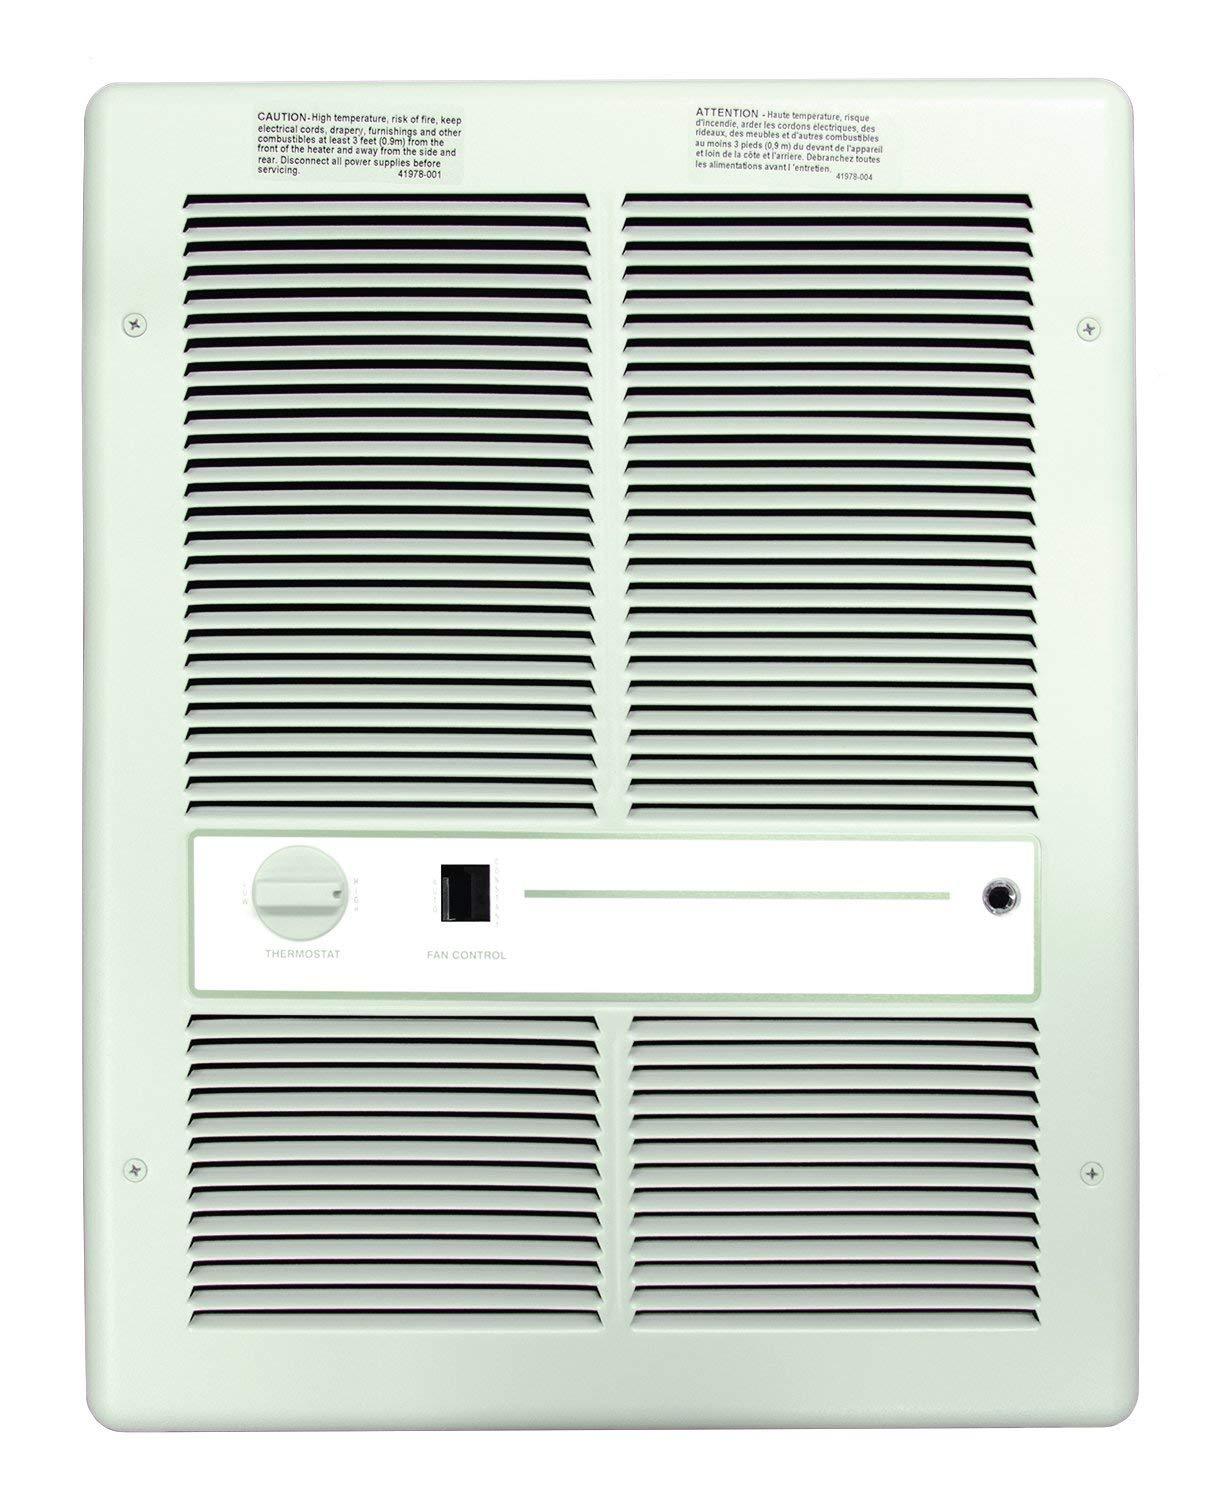 TPI 1500W 120V 3310 Series Fan Forced Wall Heater (White) - With Summer Fan Switch - 2 Pole Thermostat - E3313T2SRPW